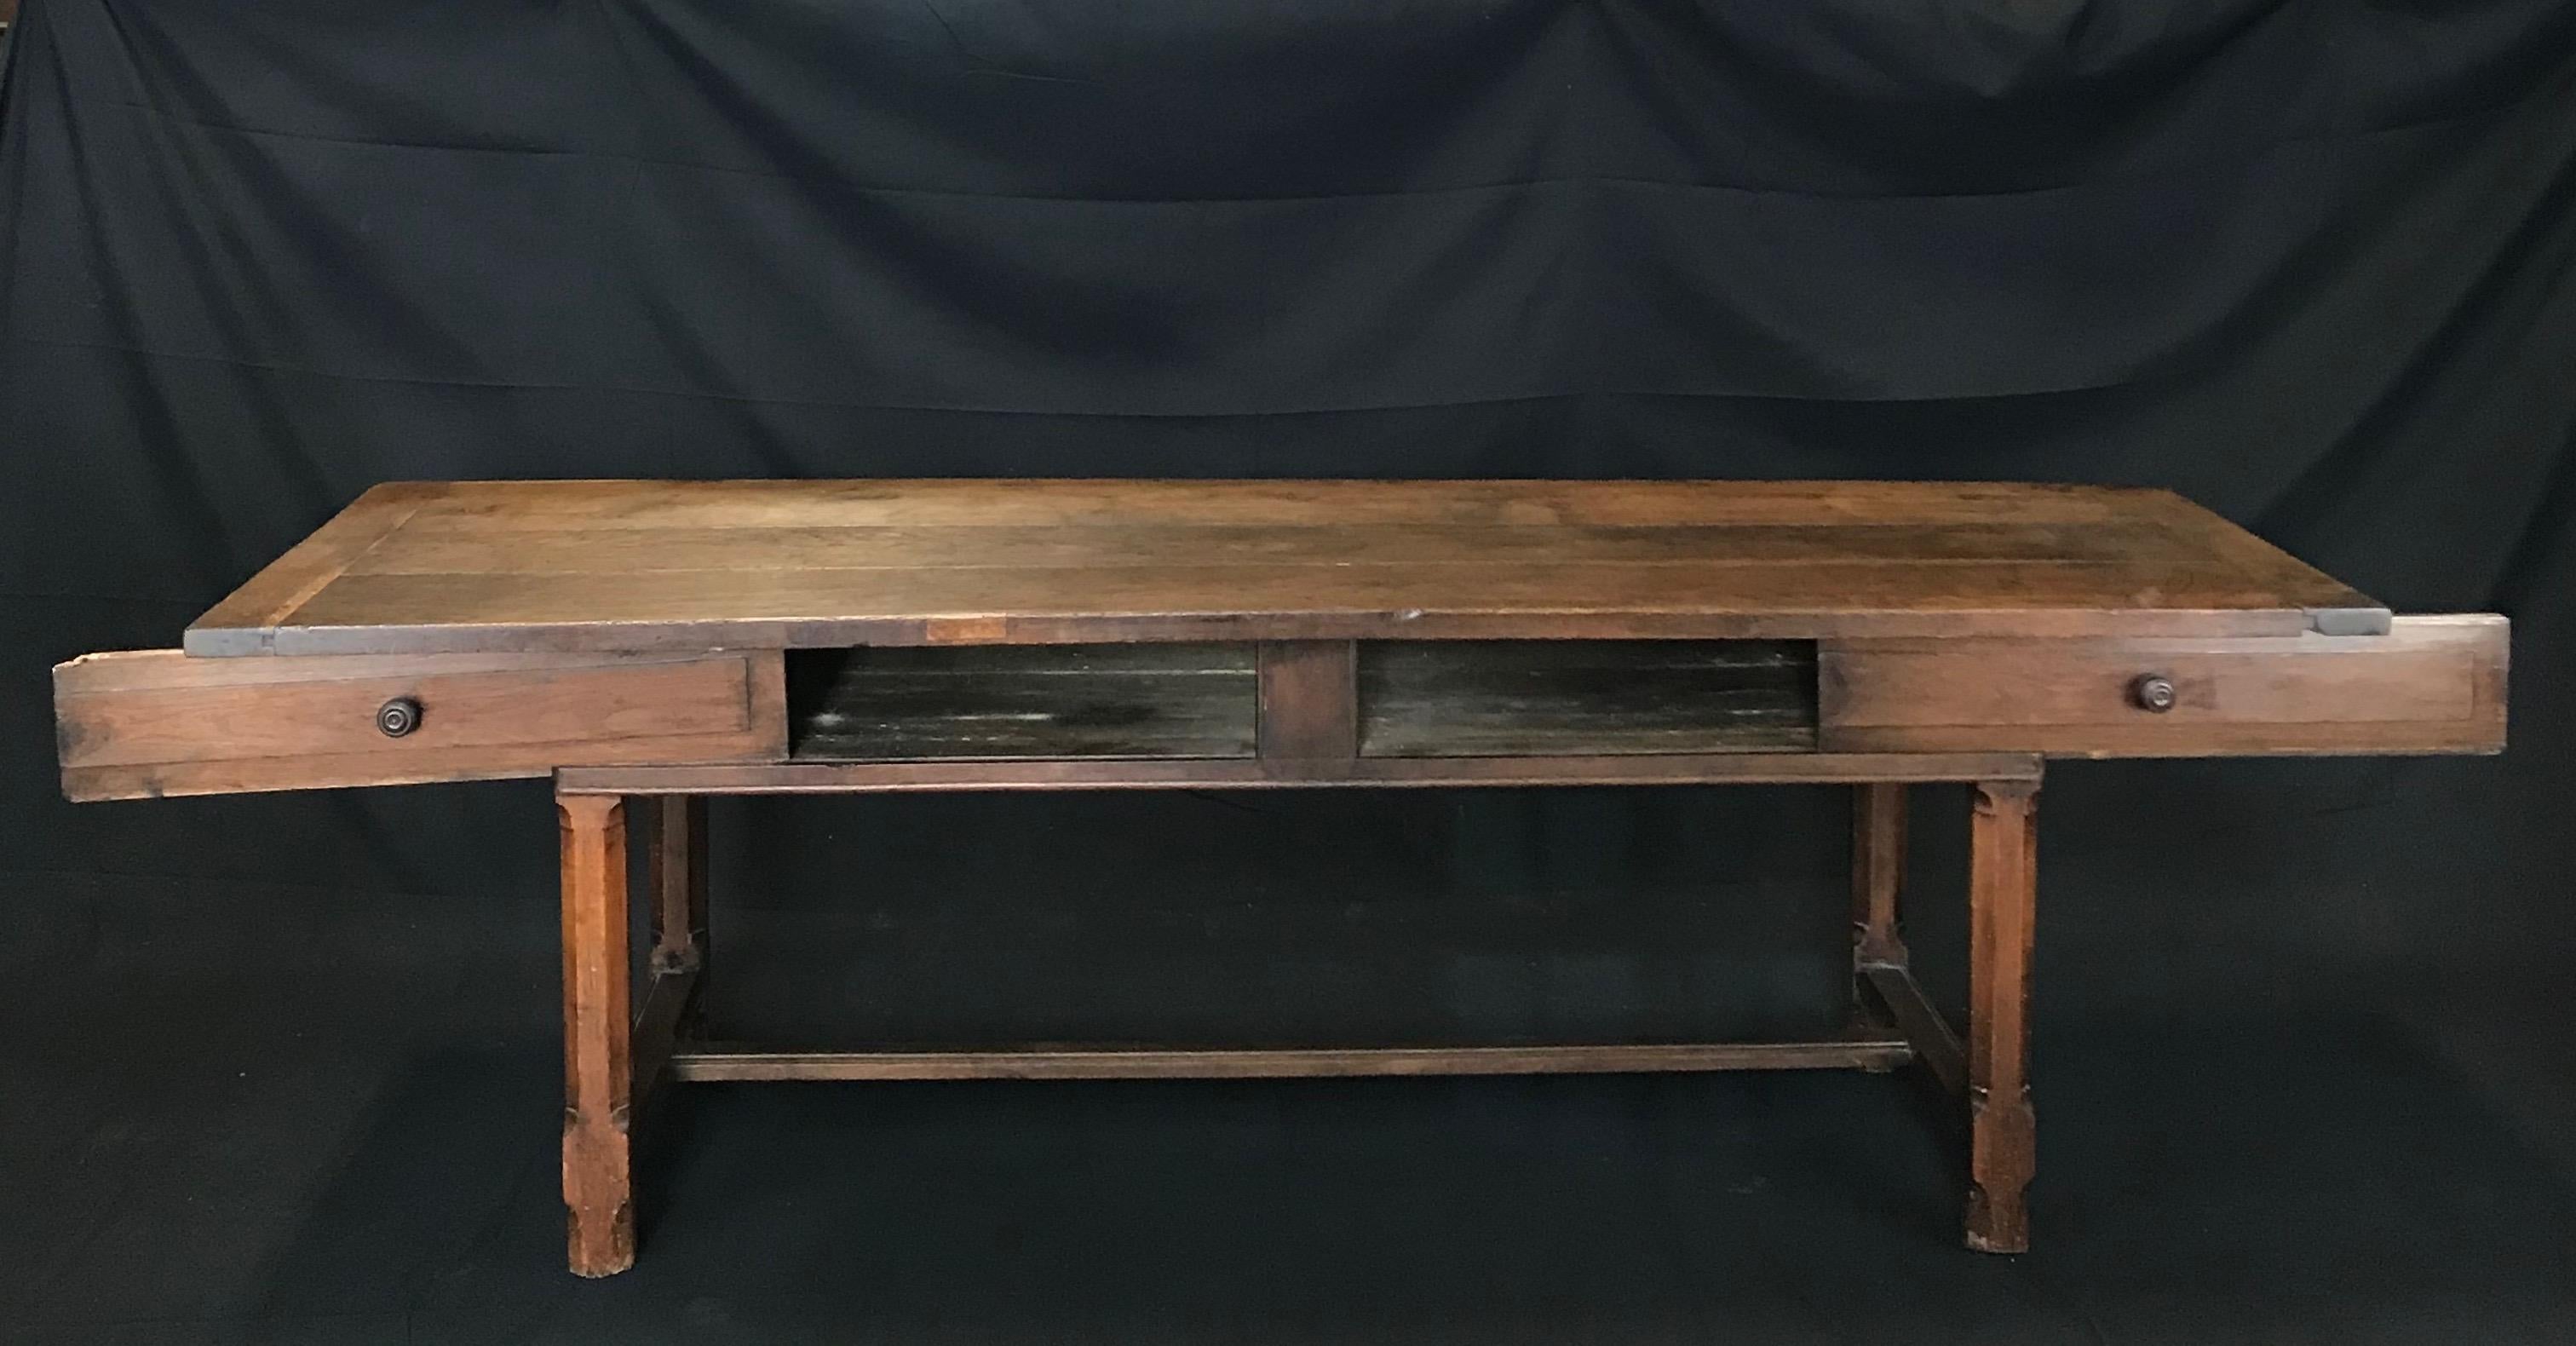 A spectacularly aged oak farmhouse table from the French countryside near Lyon, made around the early 1800s. The table has a marvelous top of three boards with canted corners and breadboard ends. Two large sliding drawers reside in the table’s